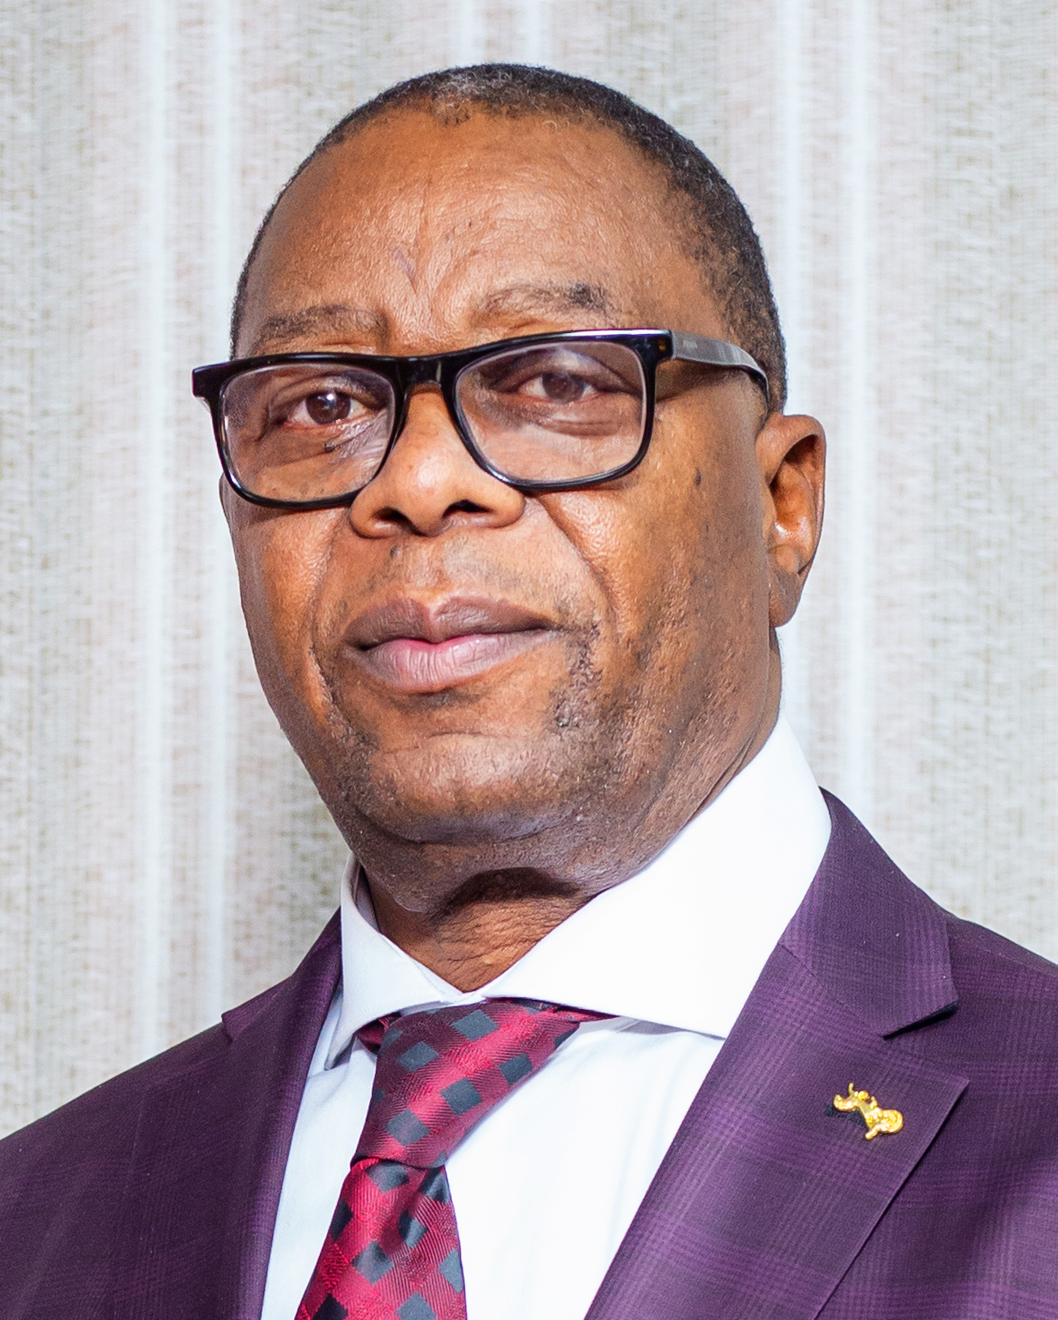 Hon. Dr. Douglas Mombeshora, ICASA 2023 Vice President / Minister of Health and Childcare